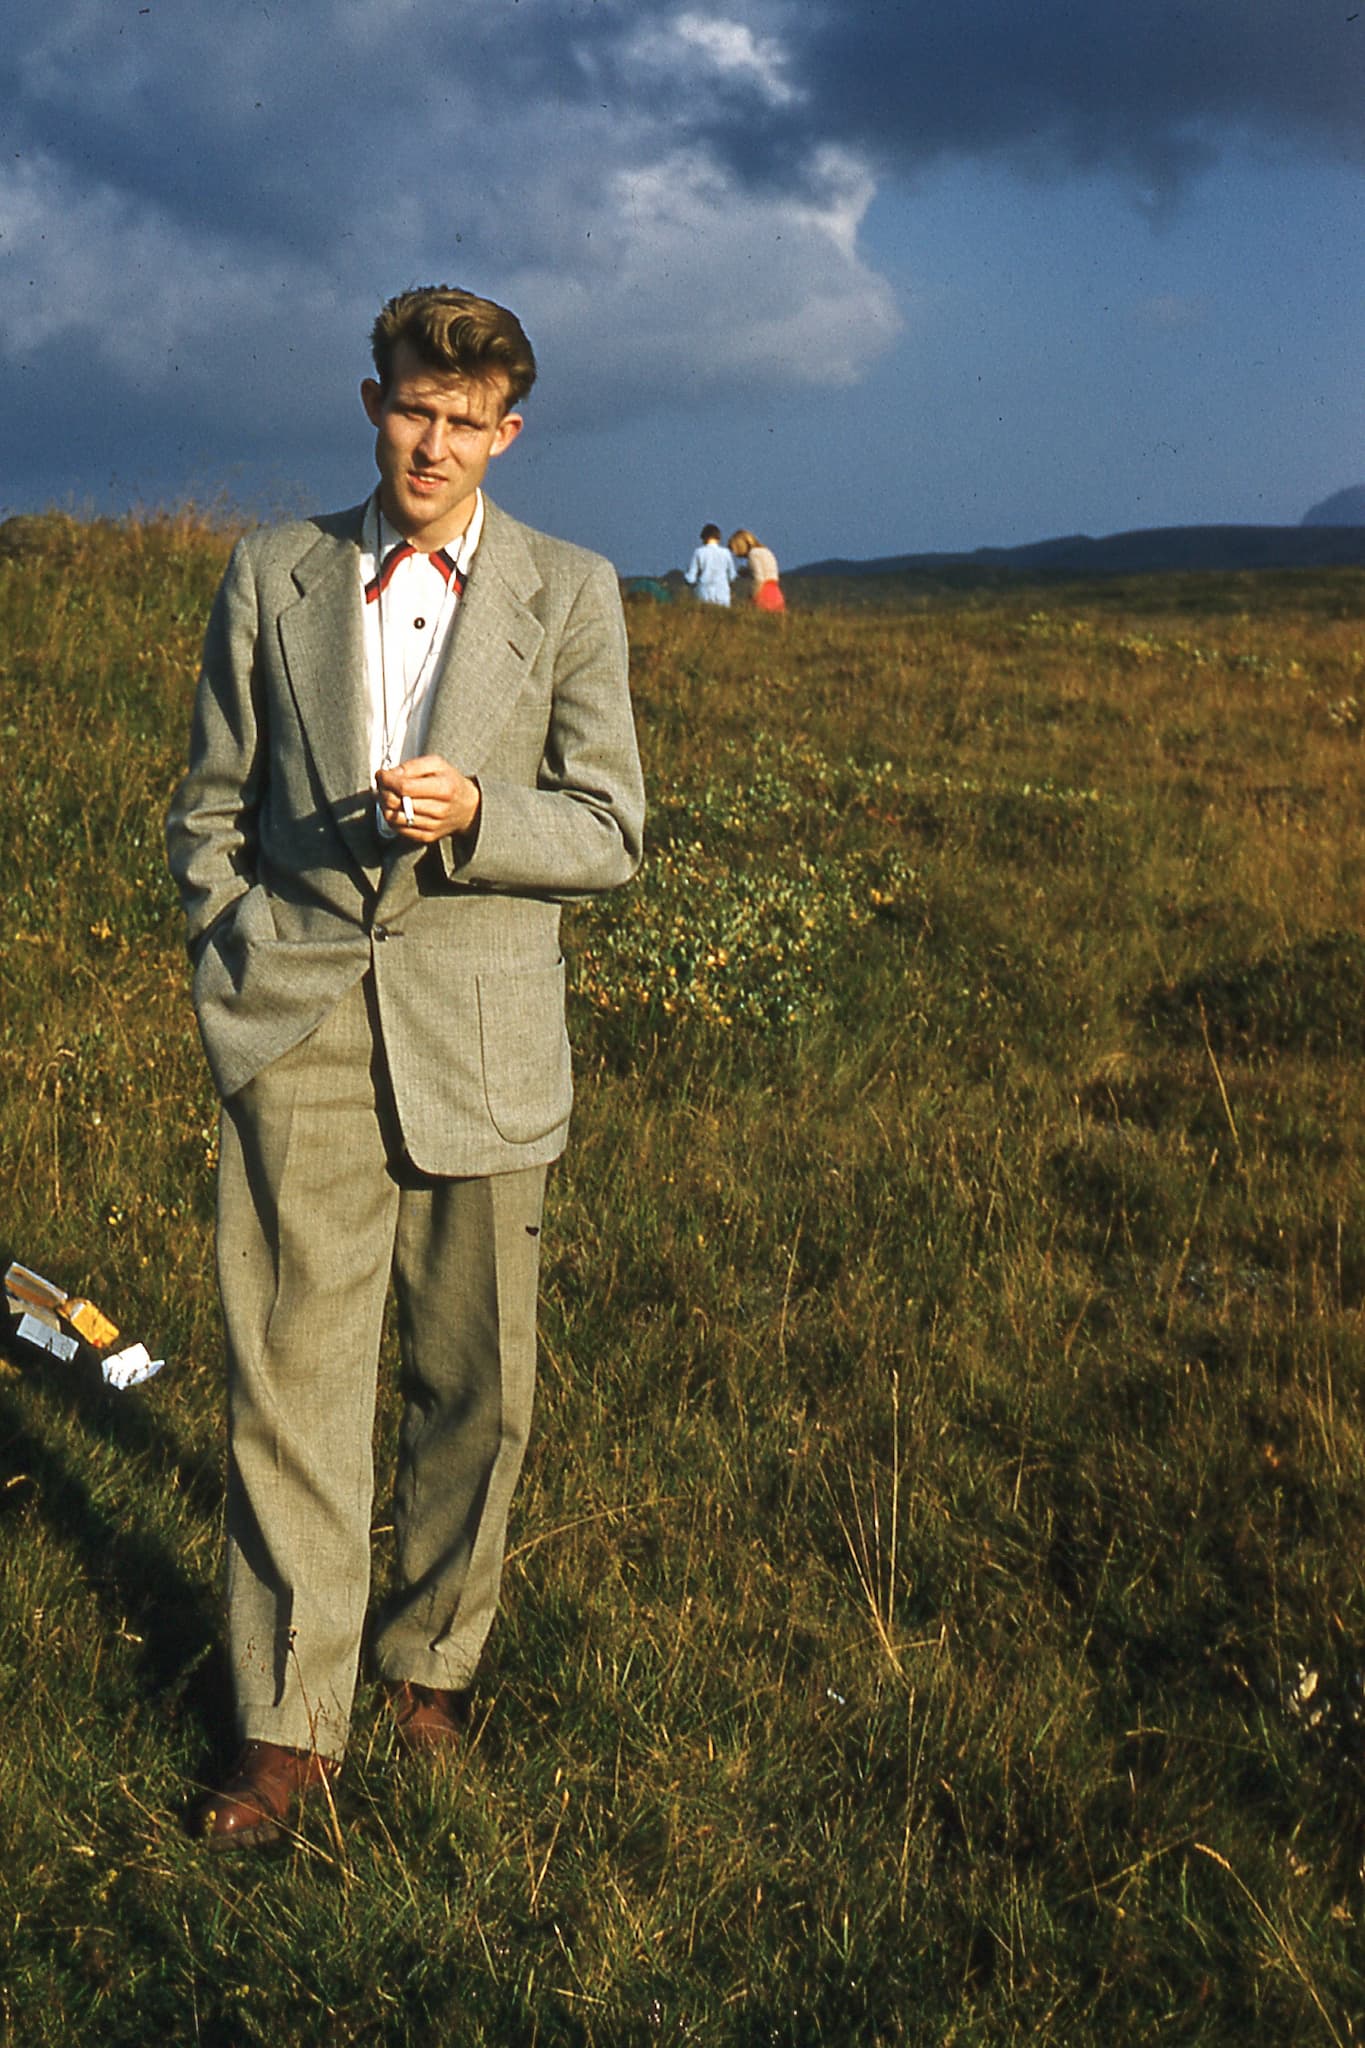 My granddad as a young man. Standing out in the Icelandic countryside. Clearly at a wedding even as his suit is quite fancy.